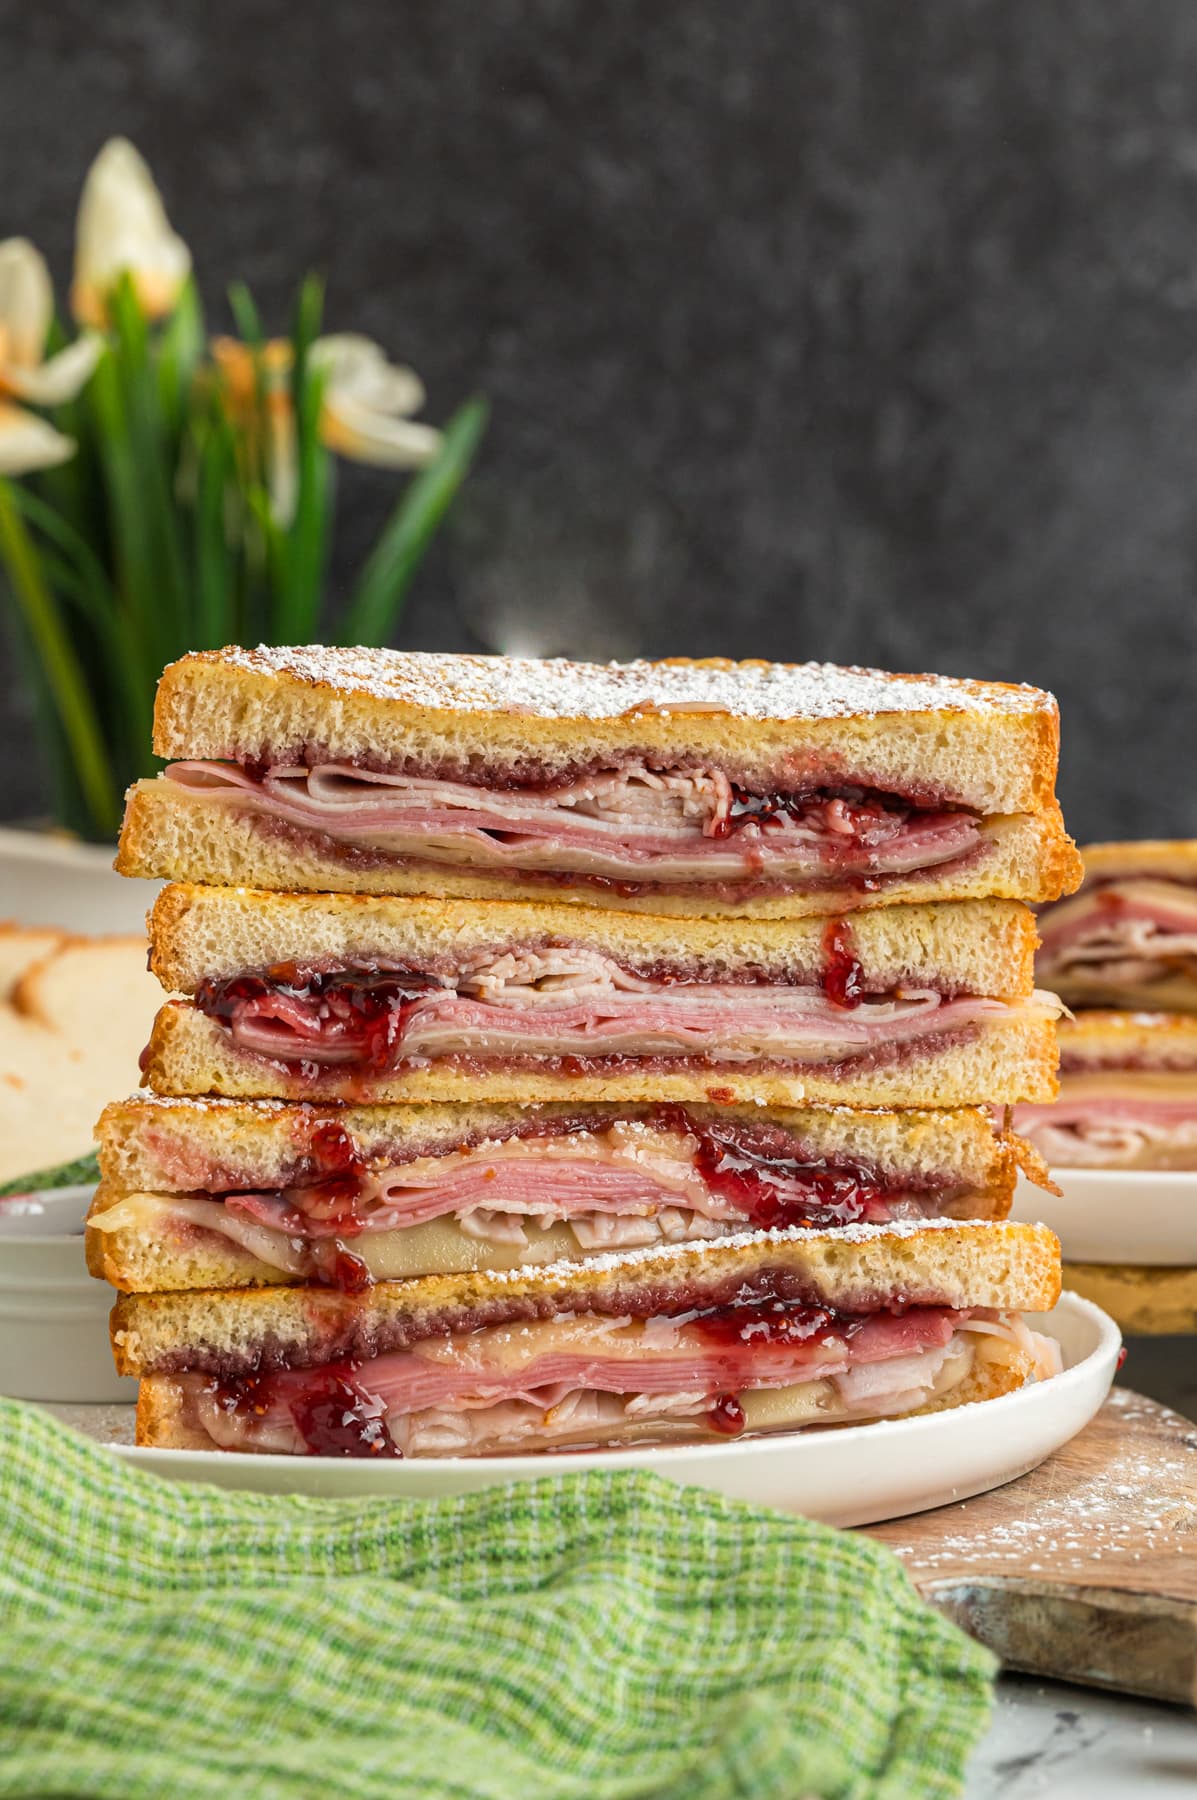 Four halves of Monte Cristo sandwiches stacked on each other